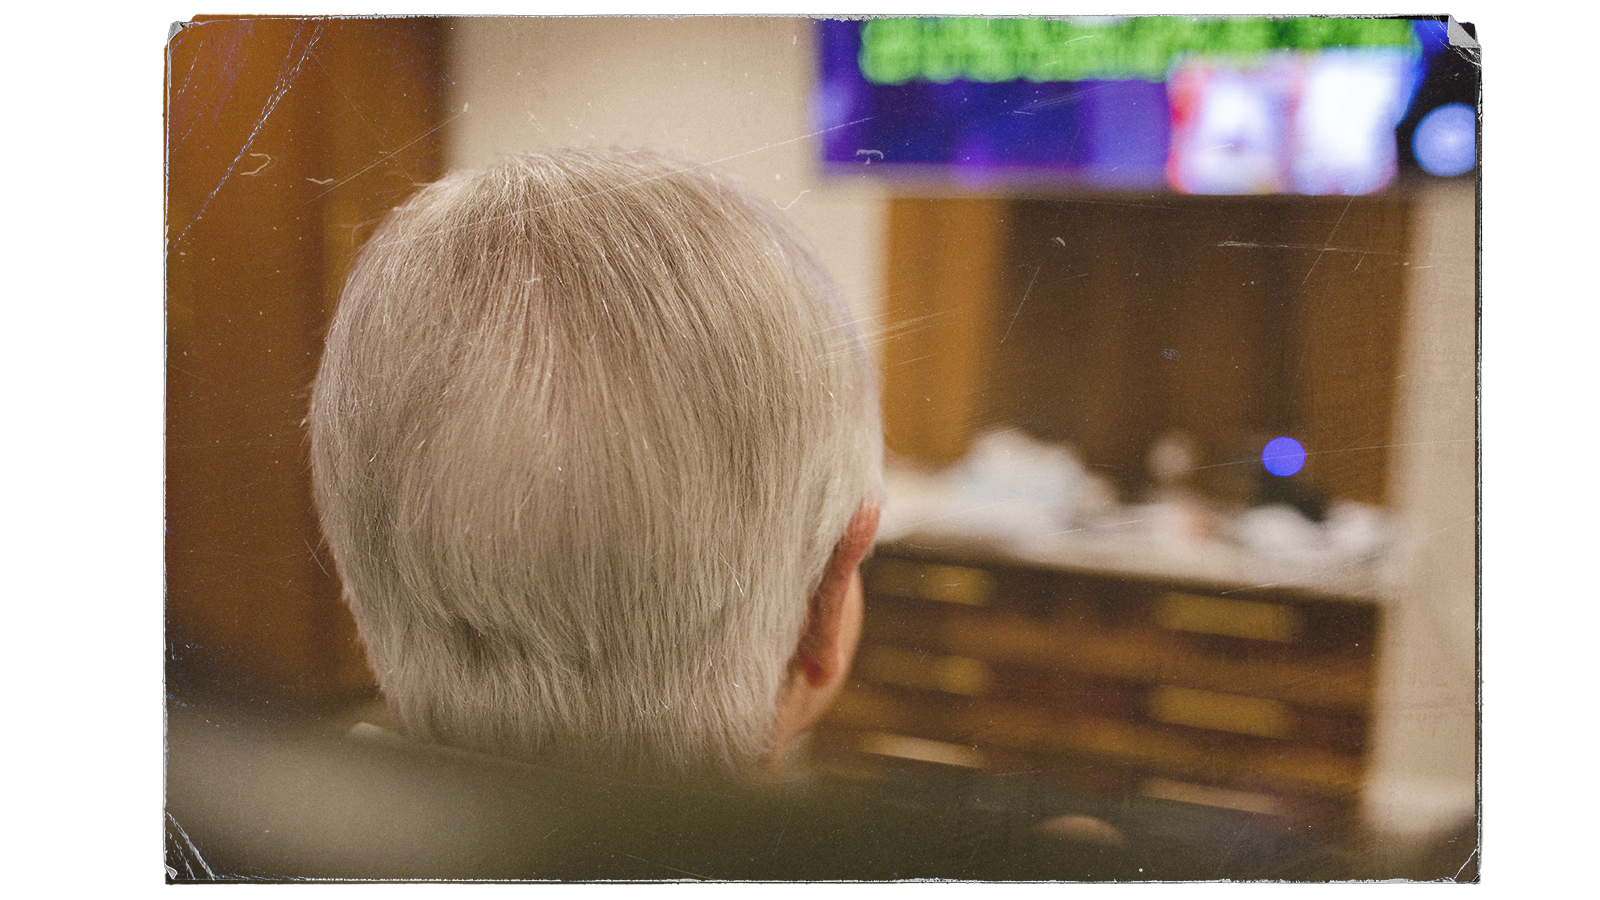 The back of a man's head with grey hair with a tv going in the background